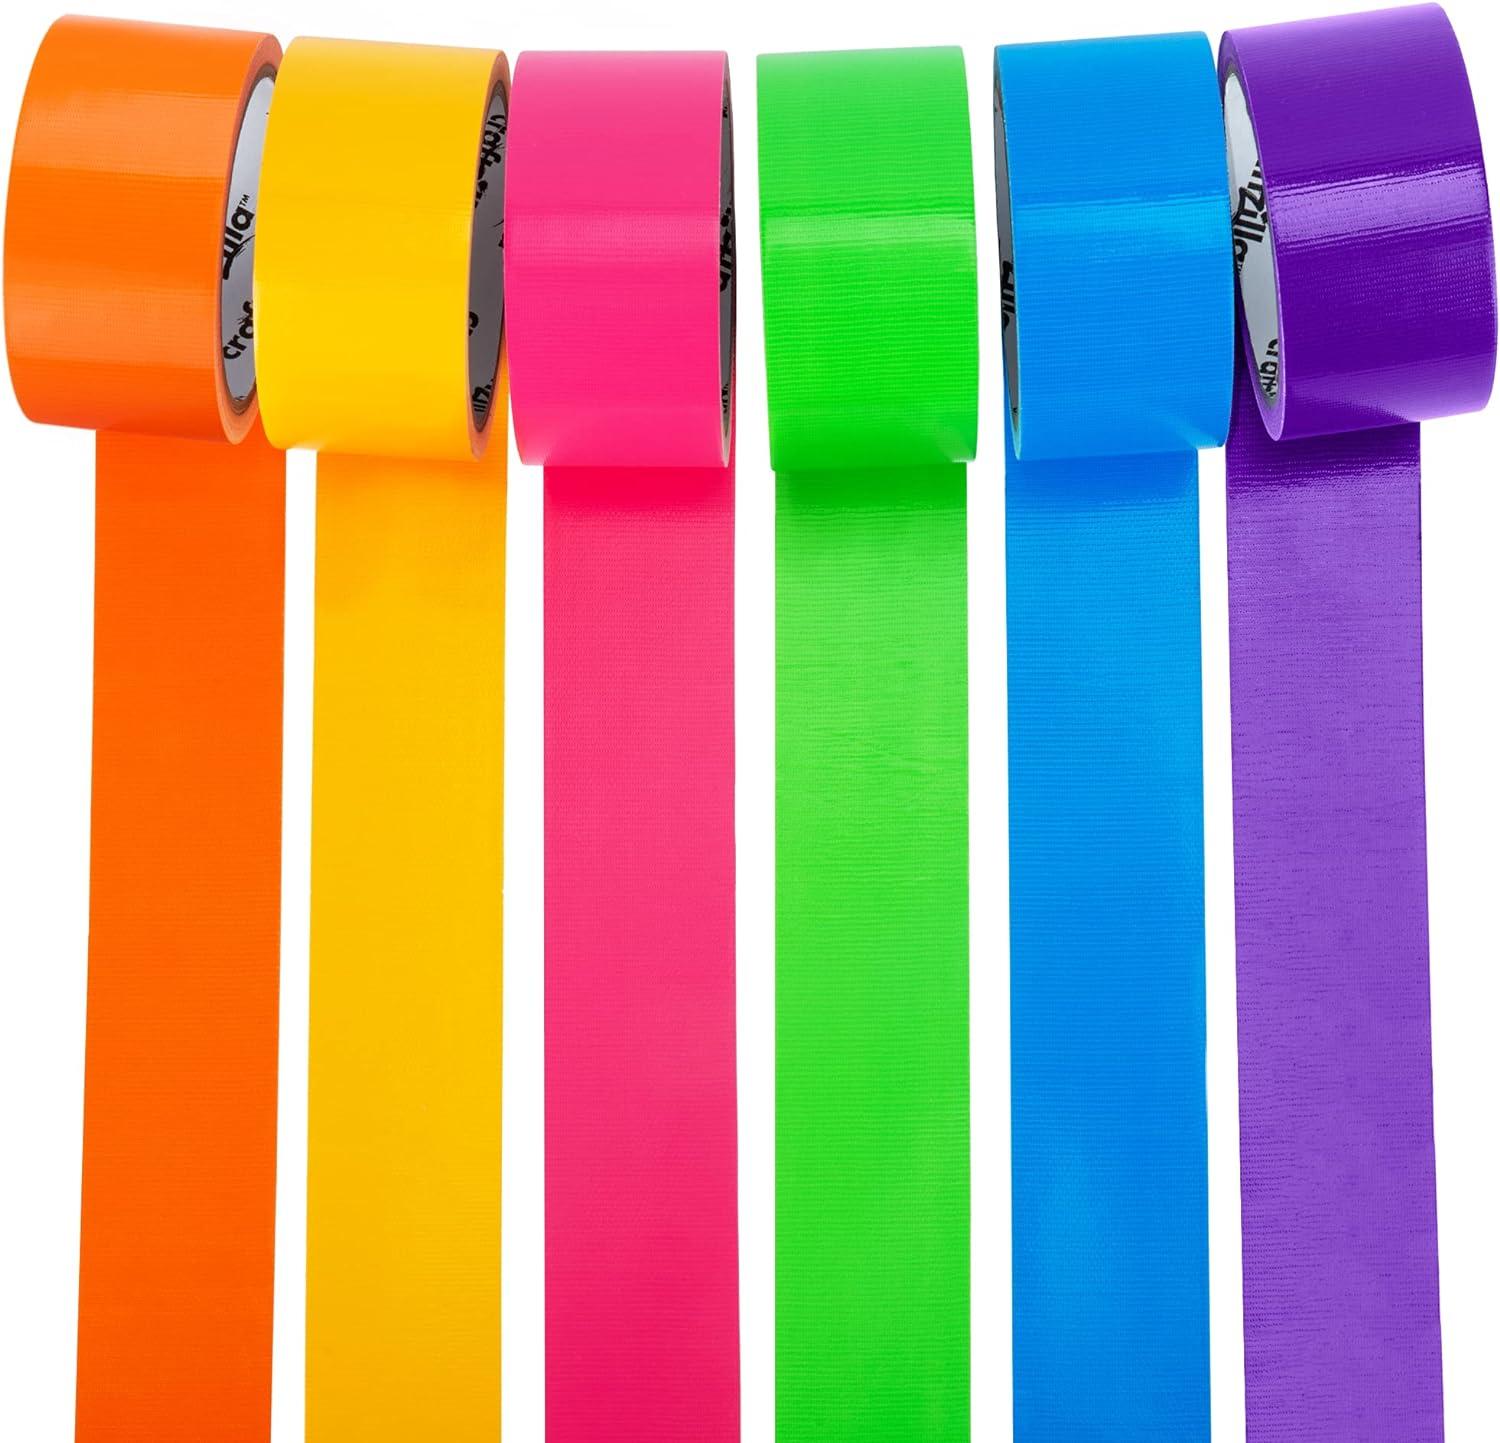 7 Pieces Colored Masking Rainbow Labelling Tape for Arts DIY, Home Decoration, Office Supplies